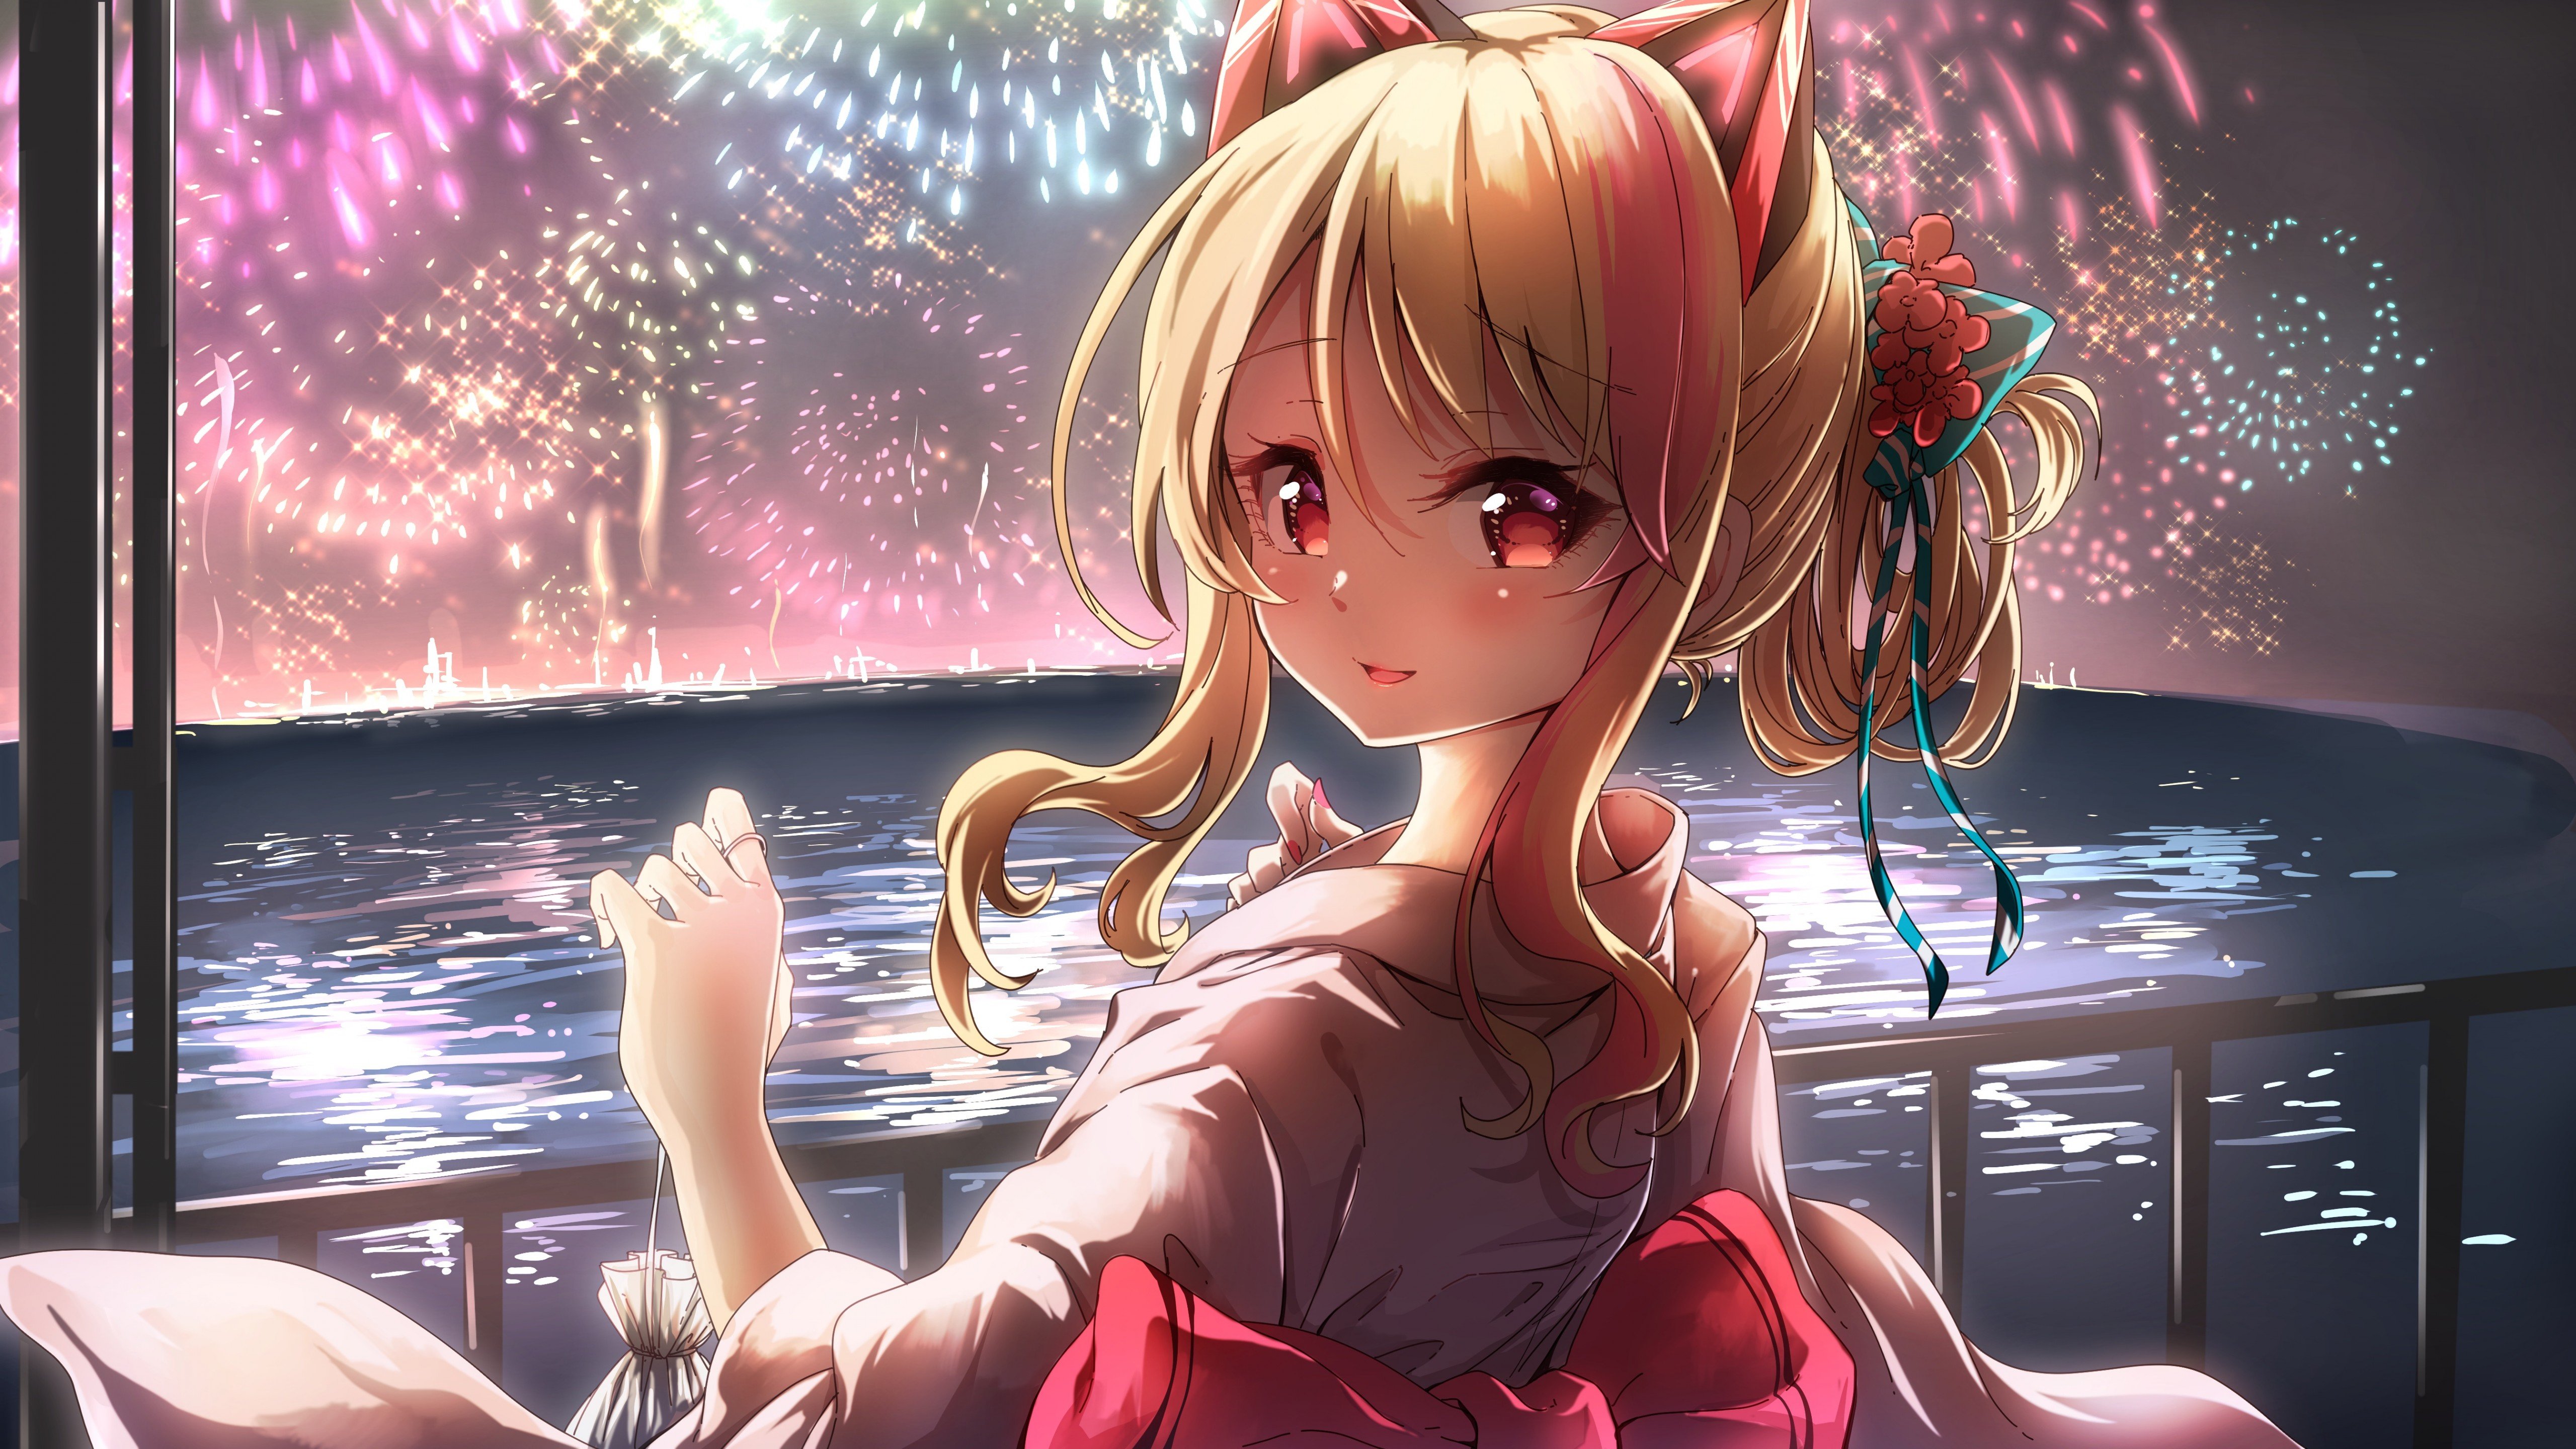 Wallpaper Anime girl with fireworks